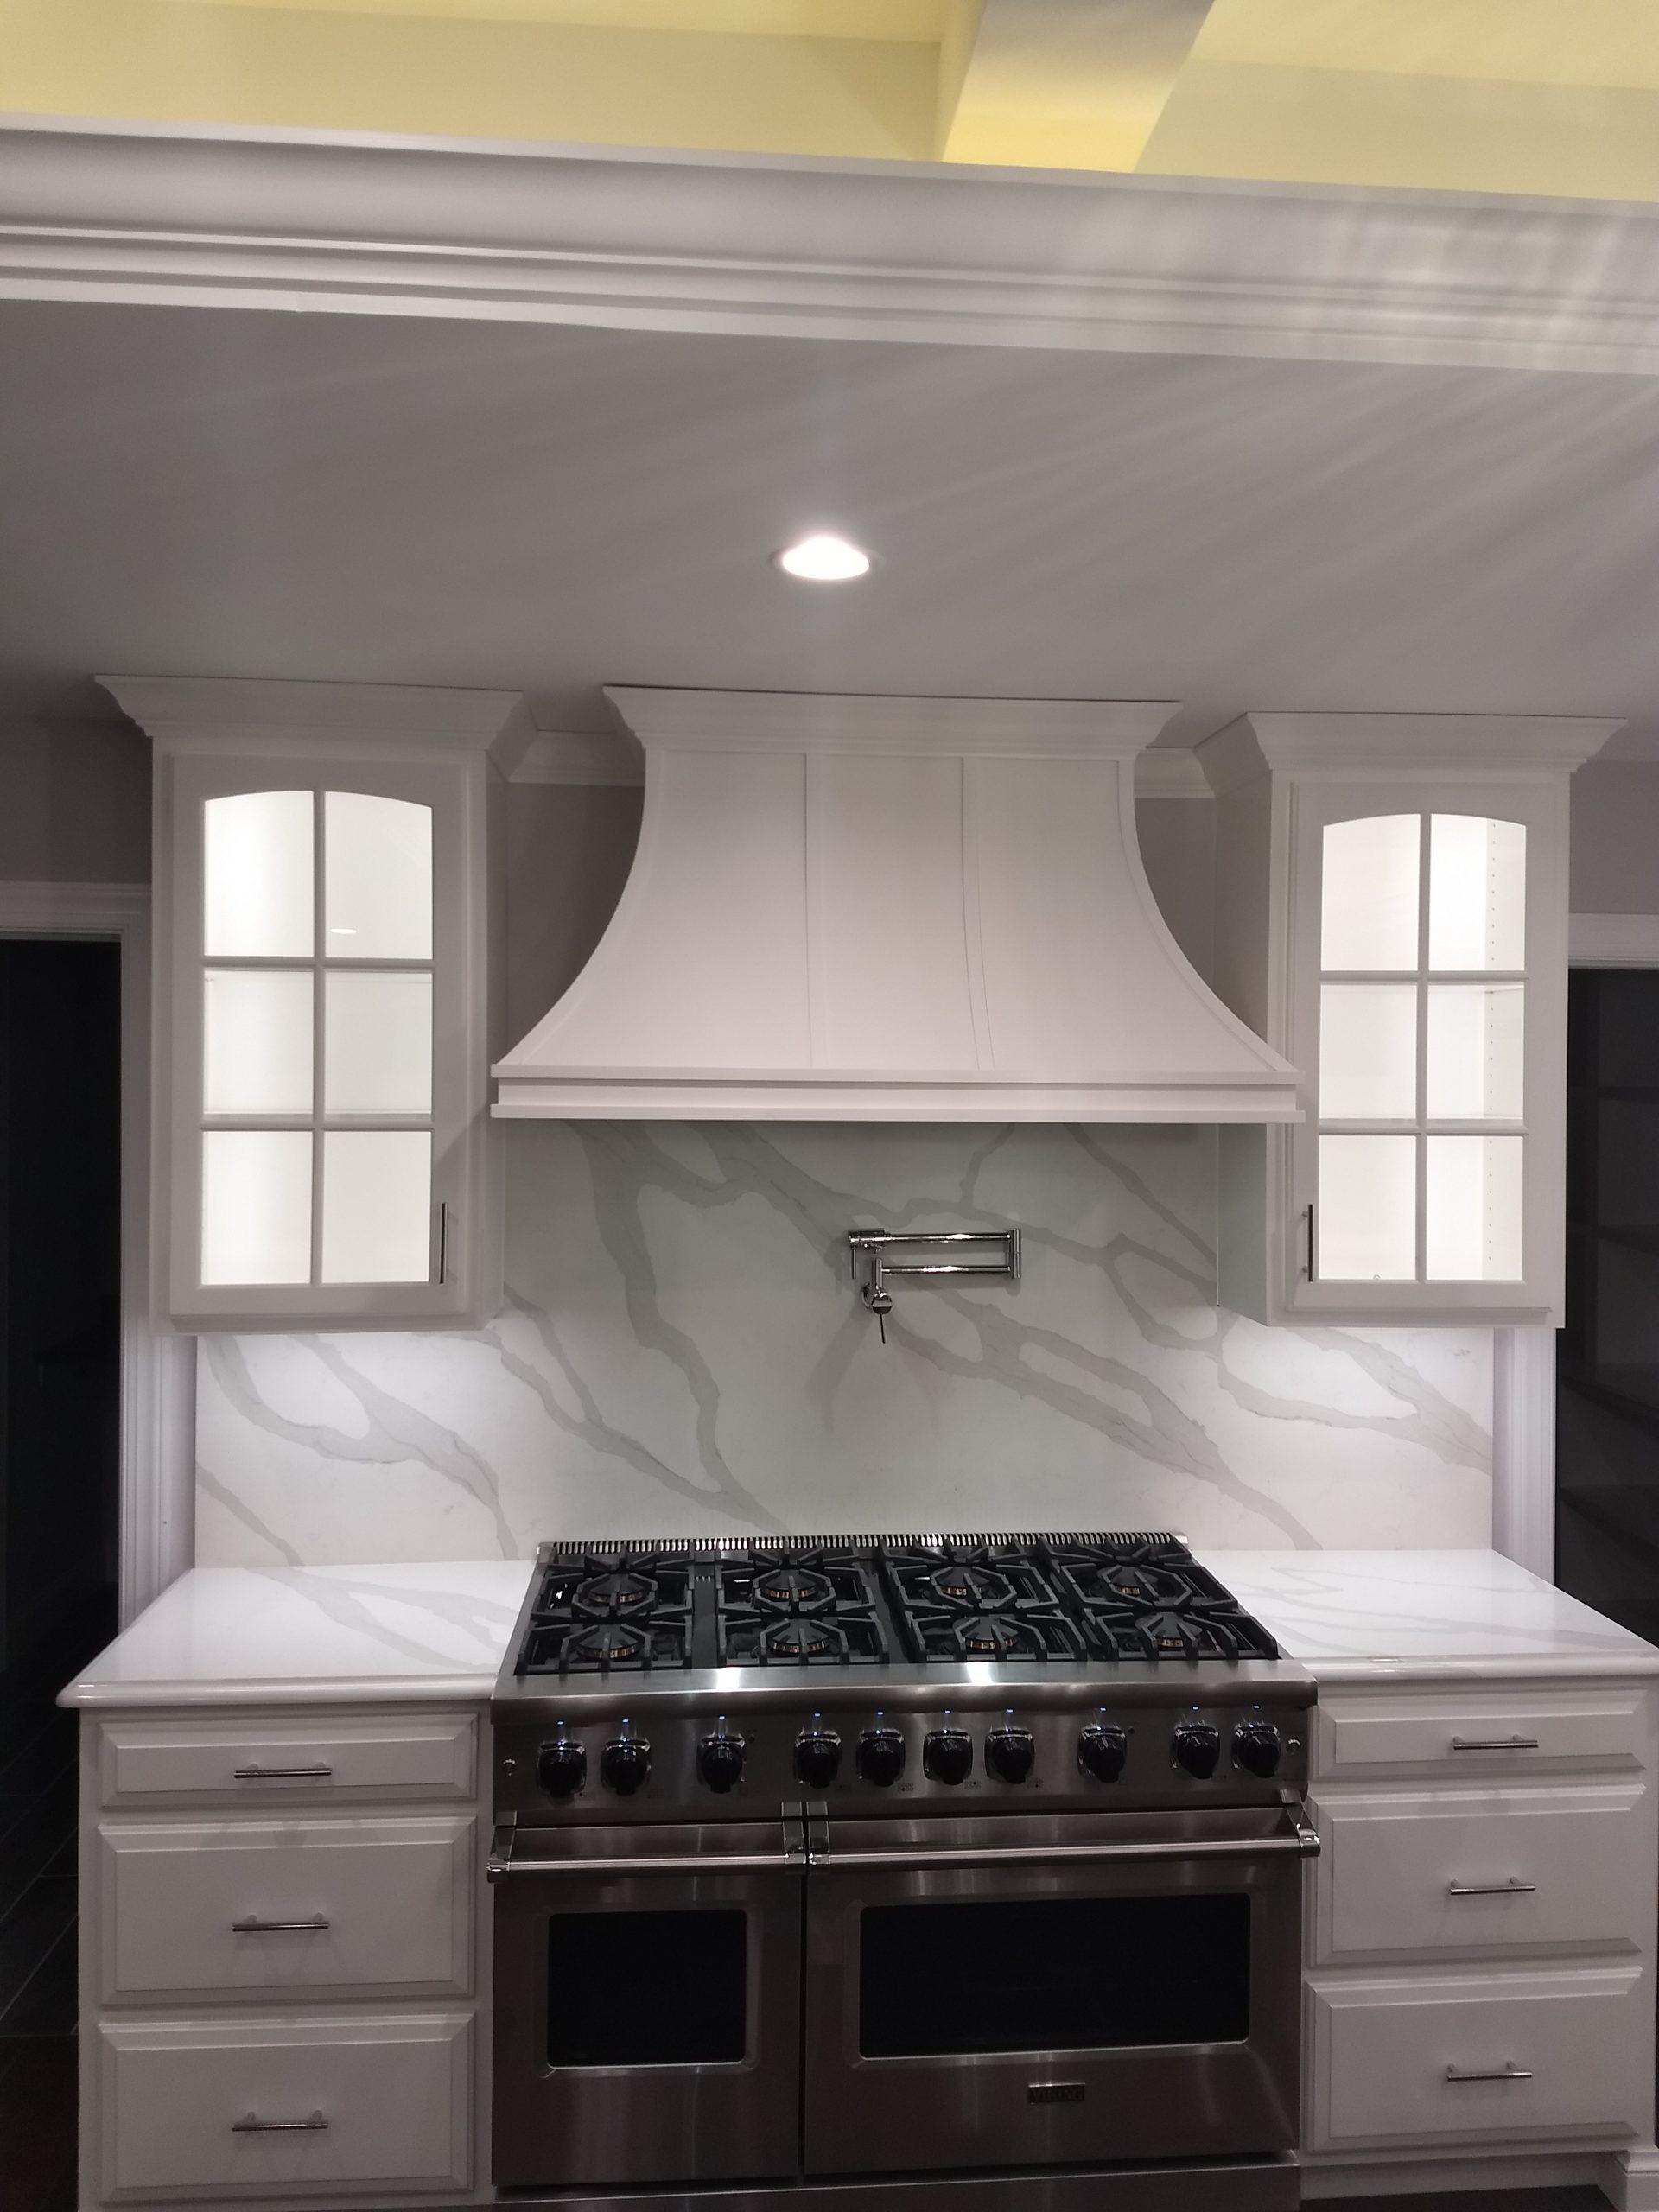 new stove with a white smoke catcher and white cabinets